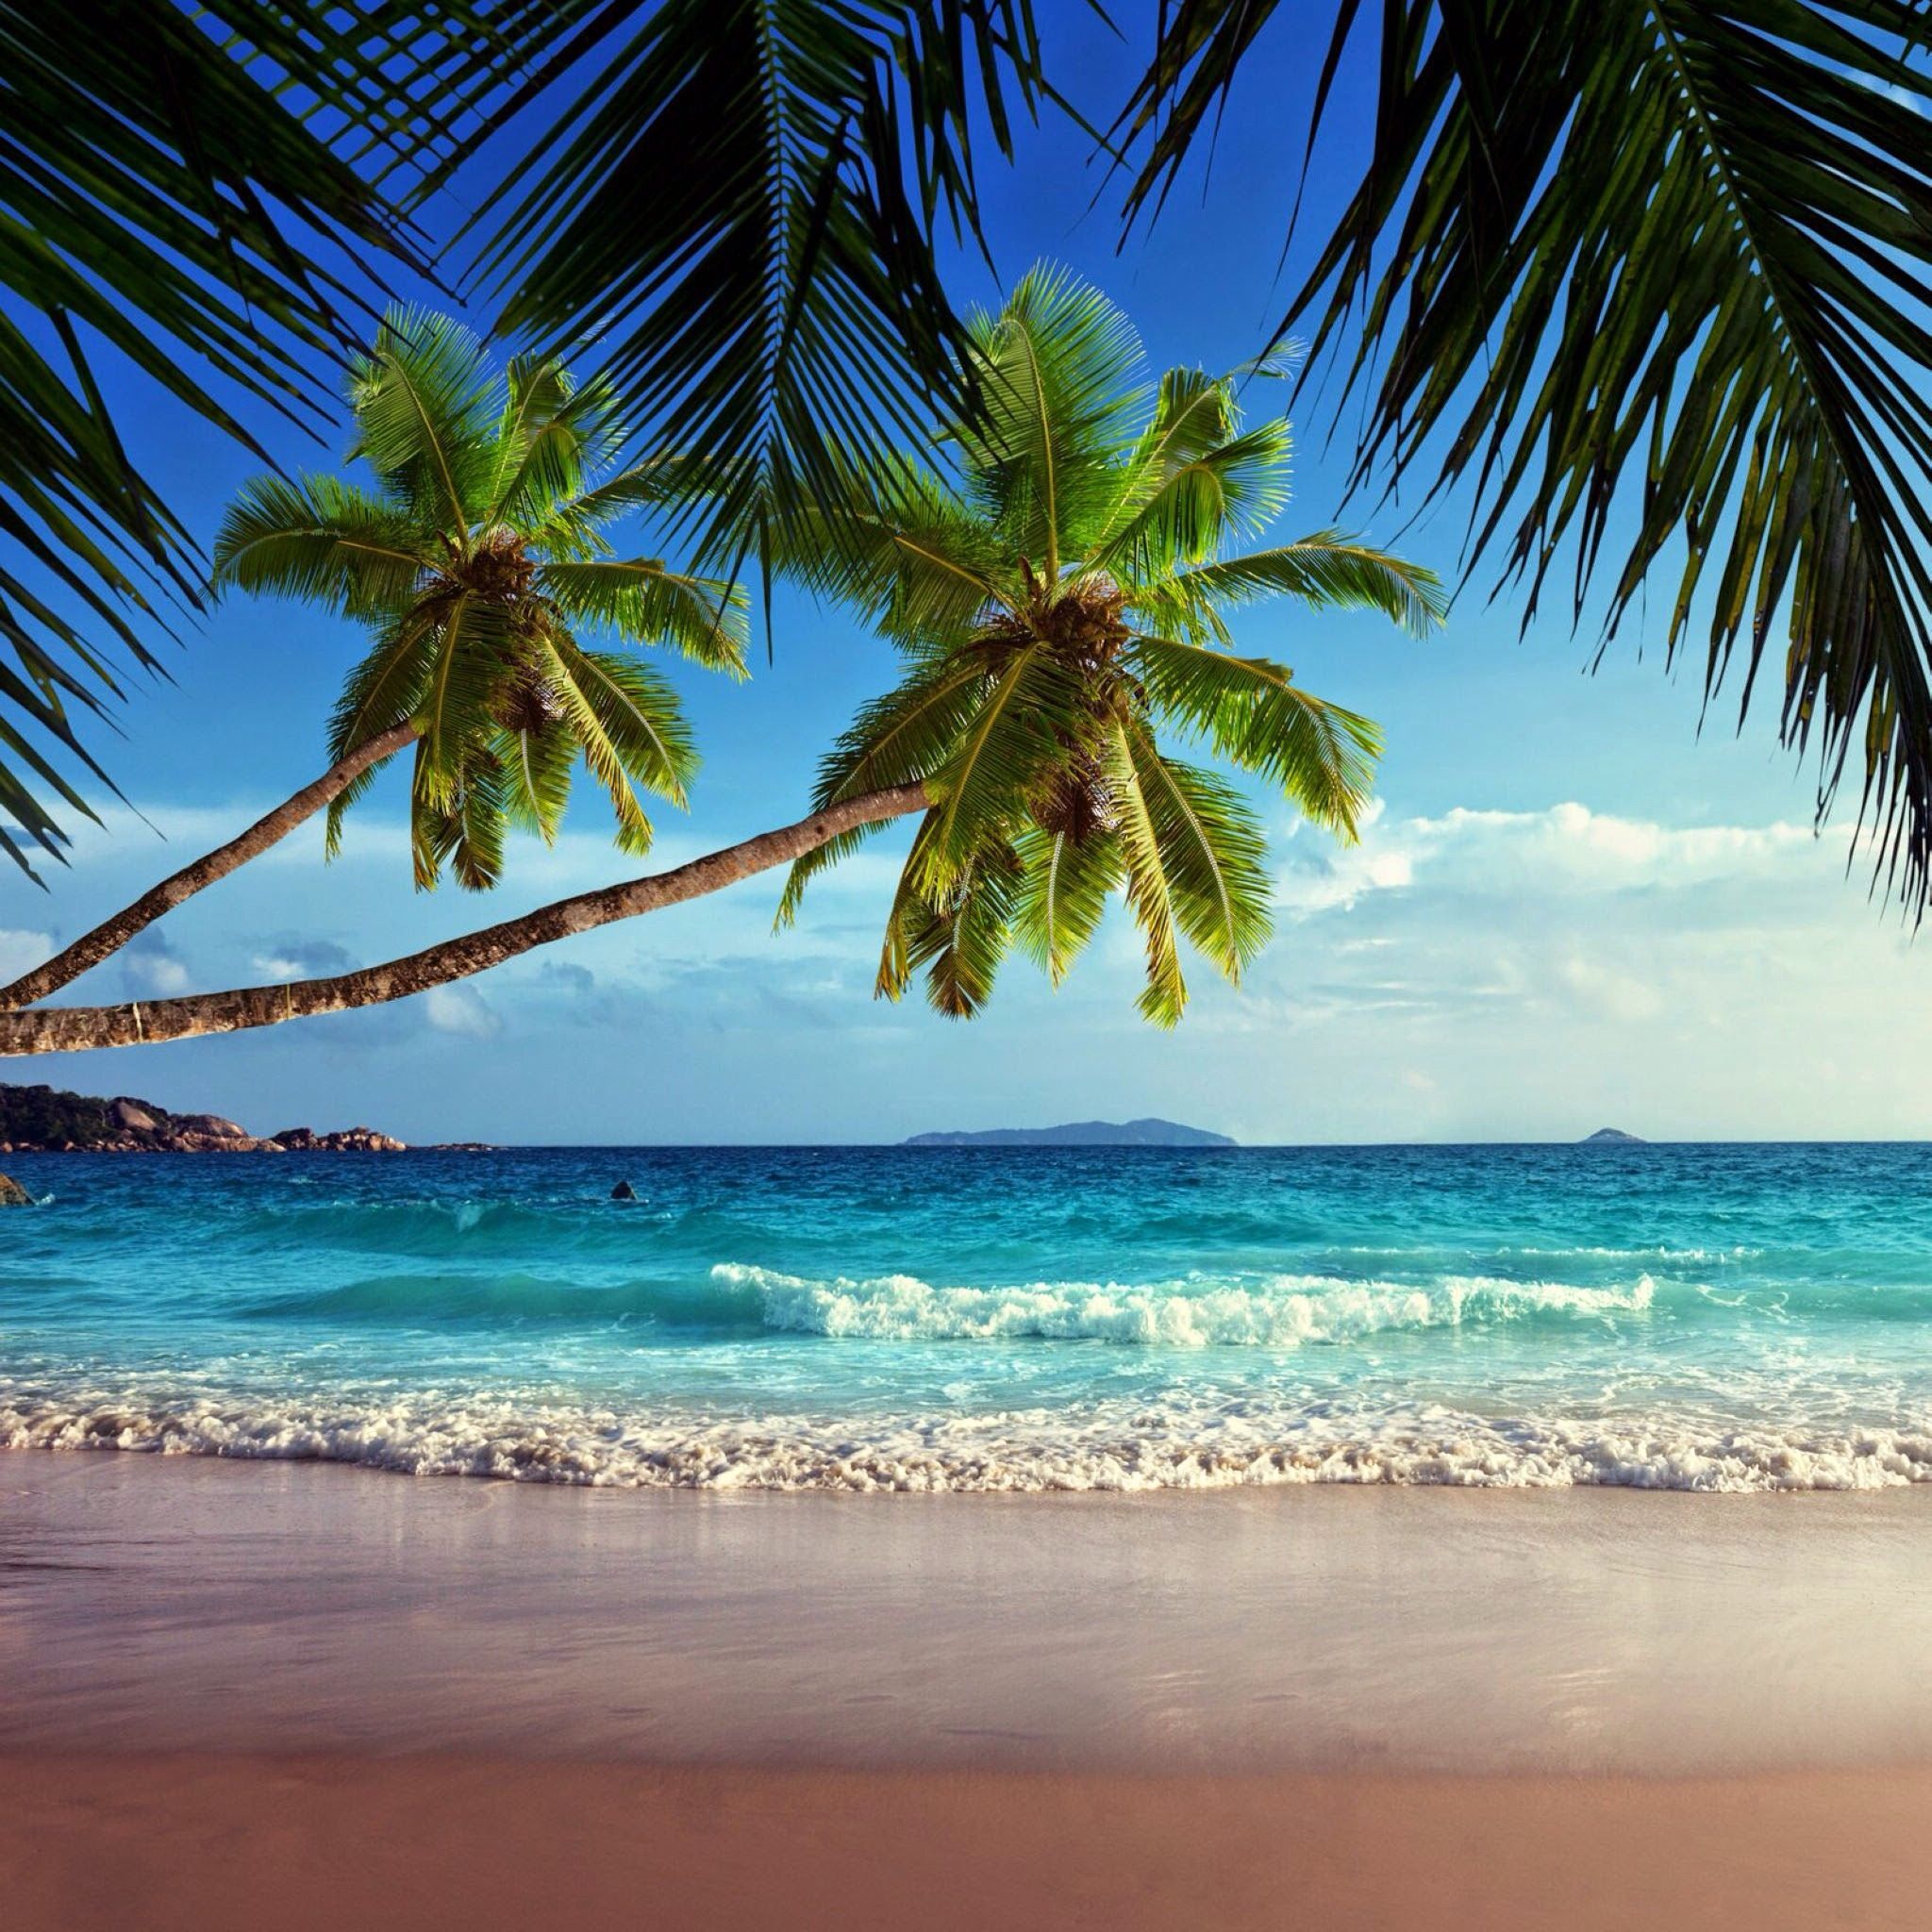 Tropical Paradise Wallpapers - 4k, HD Tropical Paradise Backgrounds on ...